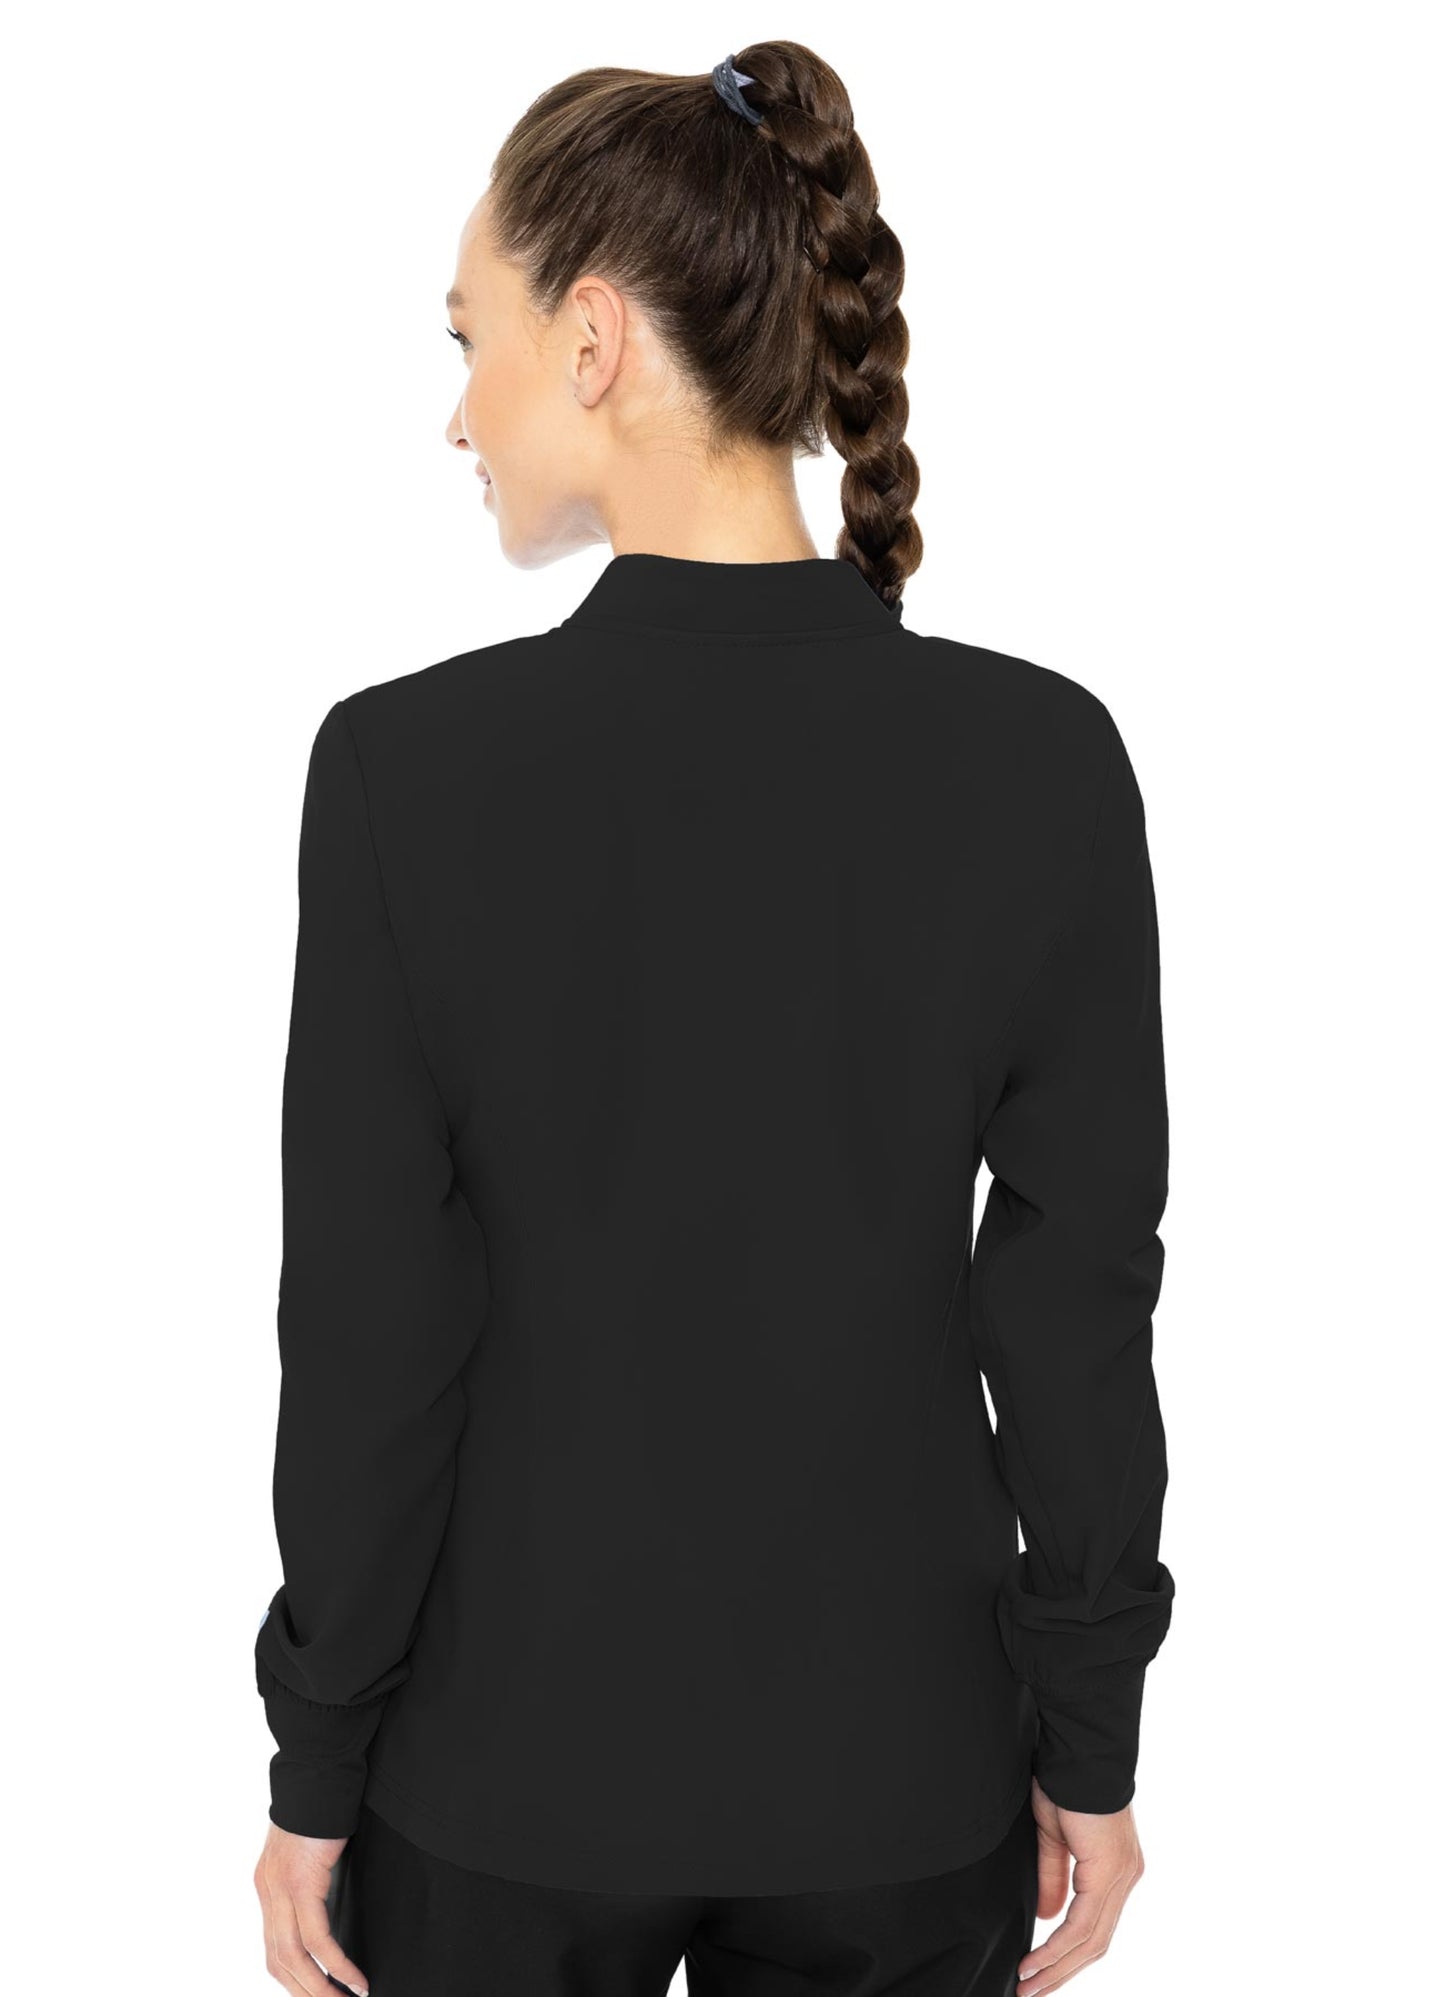 Med Couture Zip Front Warm-Up With Shoulder Yokes